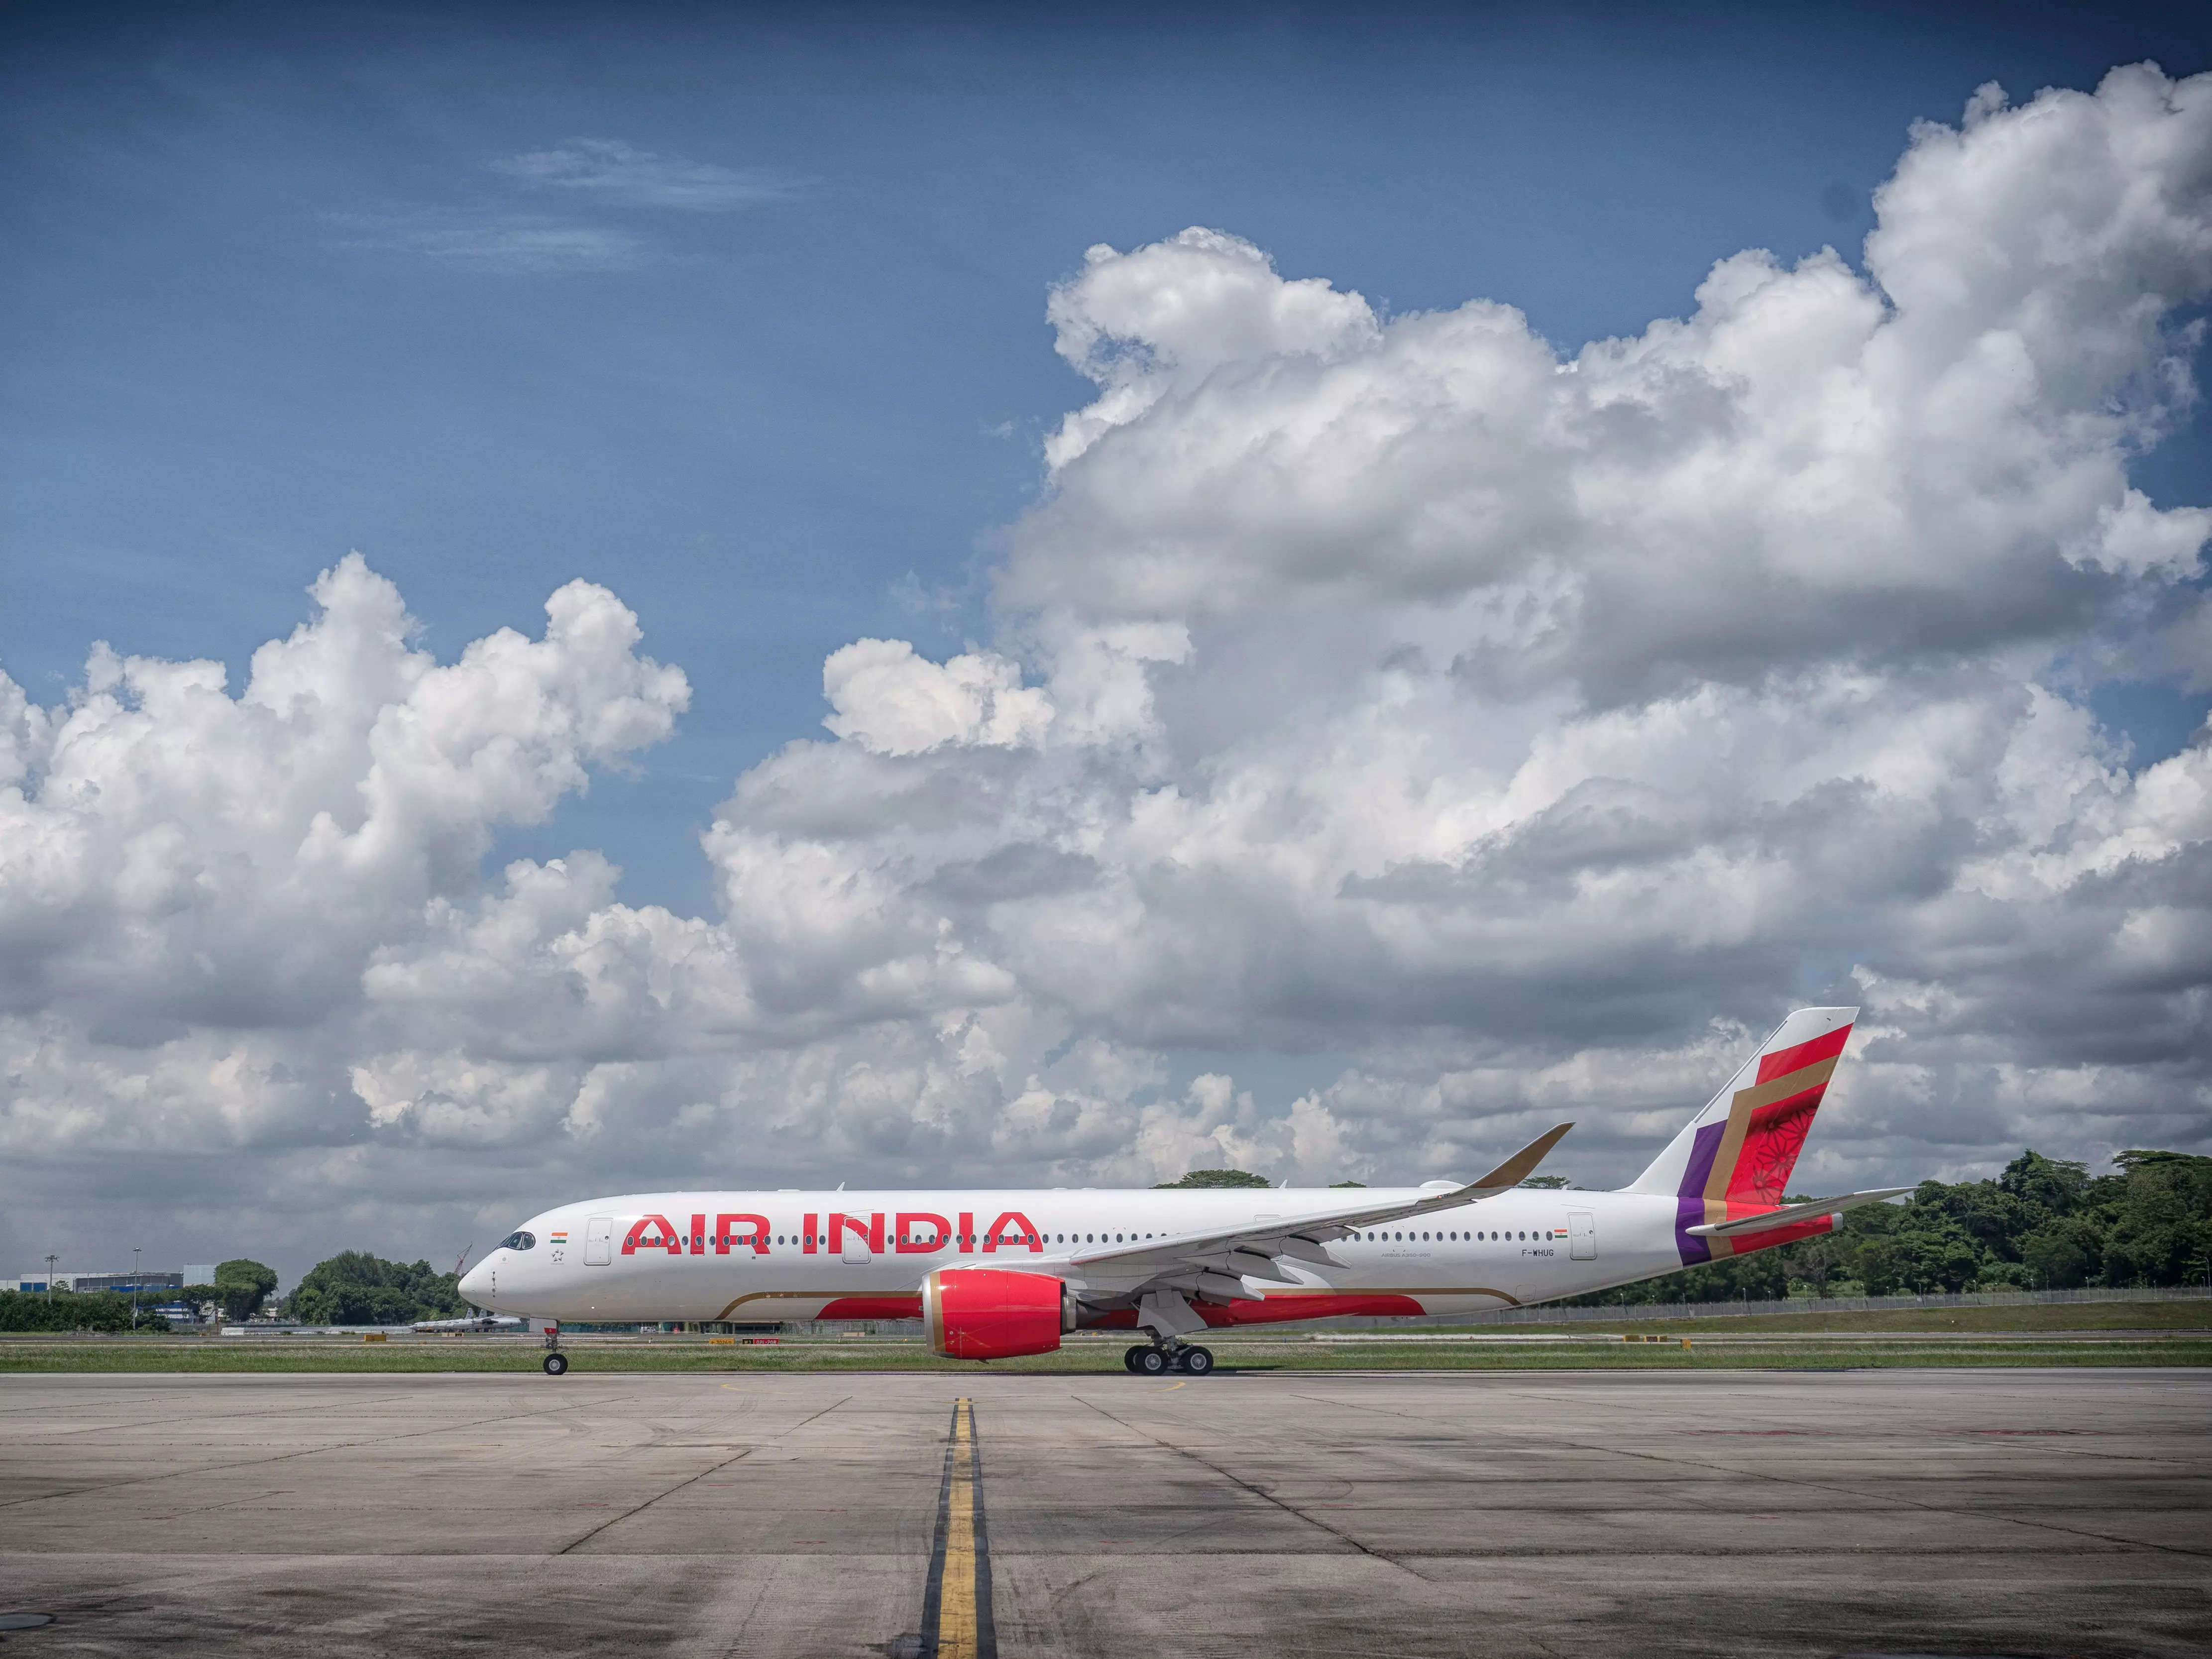 Air India to introduce Airbus A350-900 on Delhi-London Heathrow route from September 